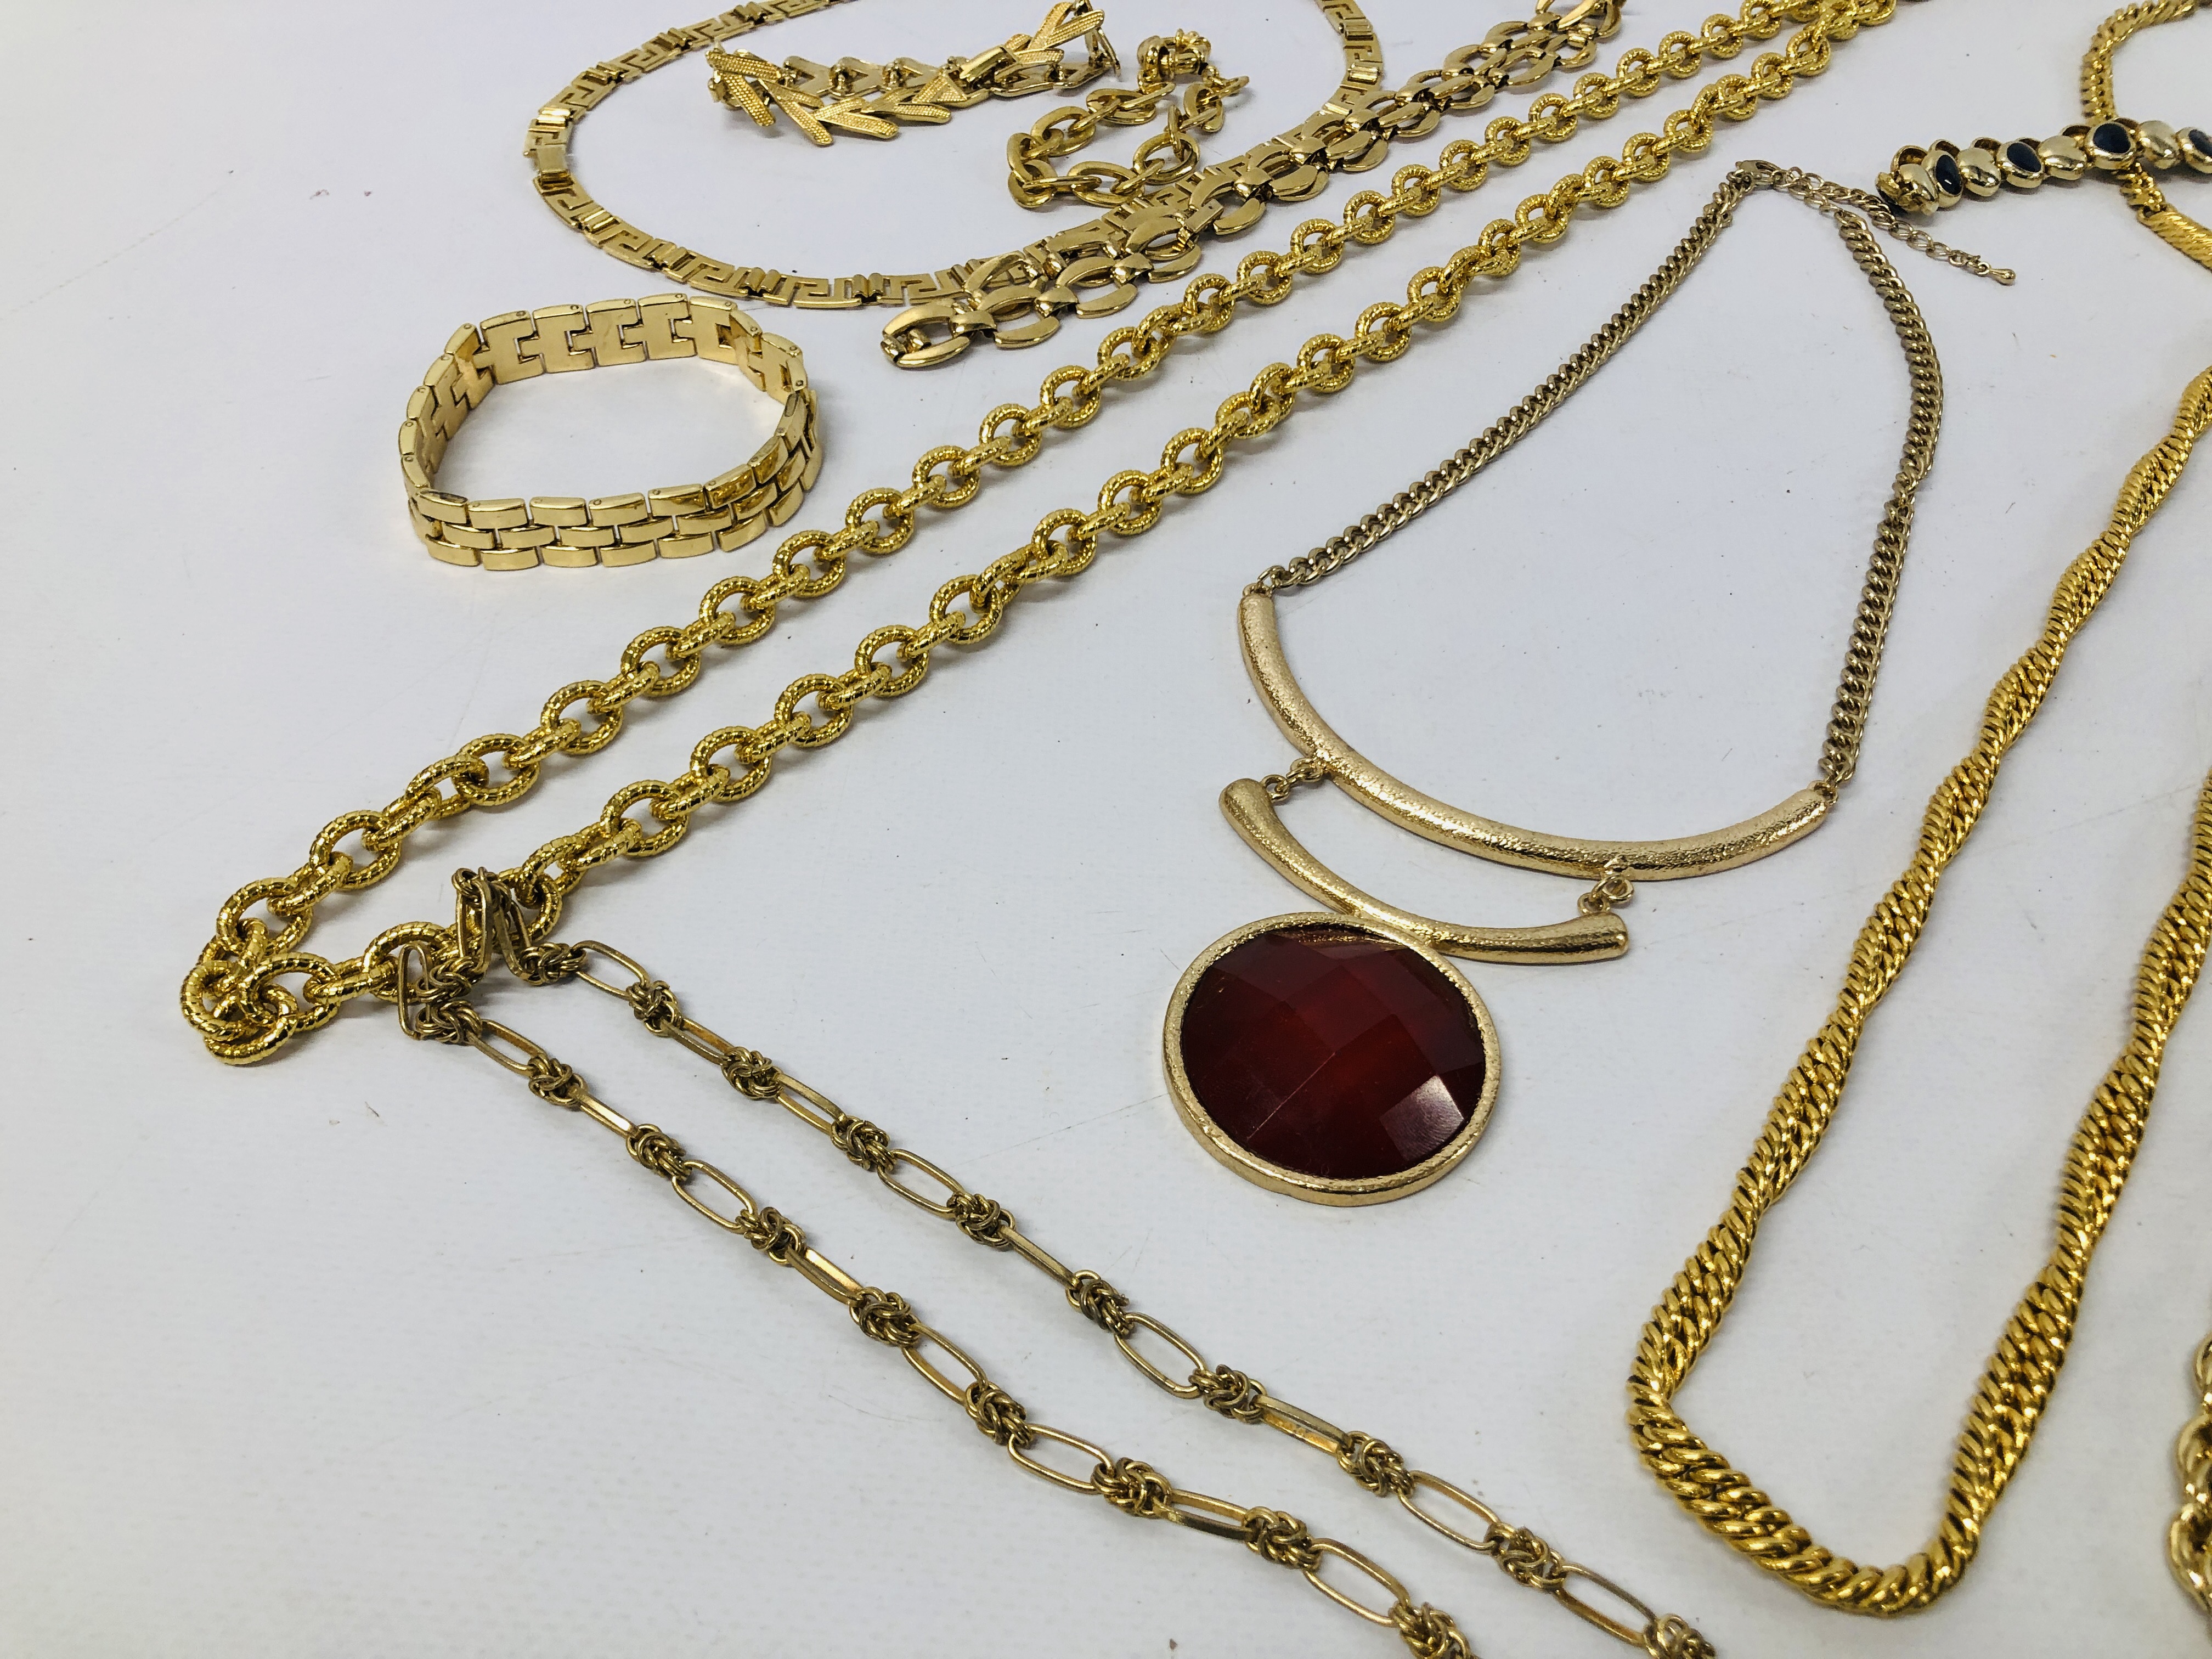 COLLECTION OF DESIGNER COSTUMER JEWELLERY, NECKLACES OF GOLD COLOUR VARIOUS DESIGNS AND LENGTH. - Image 5 of 6